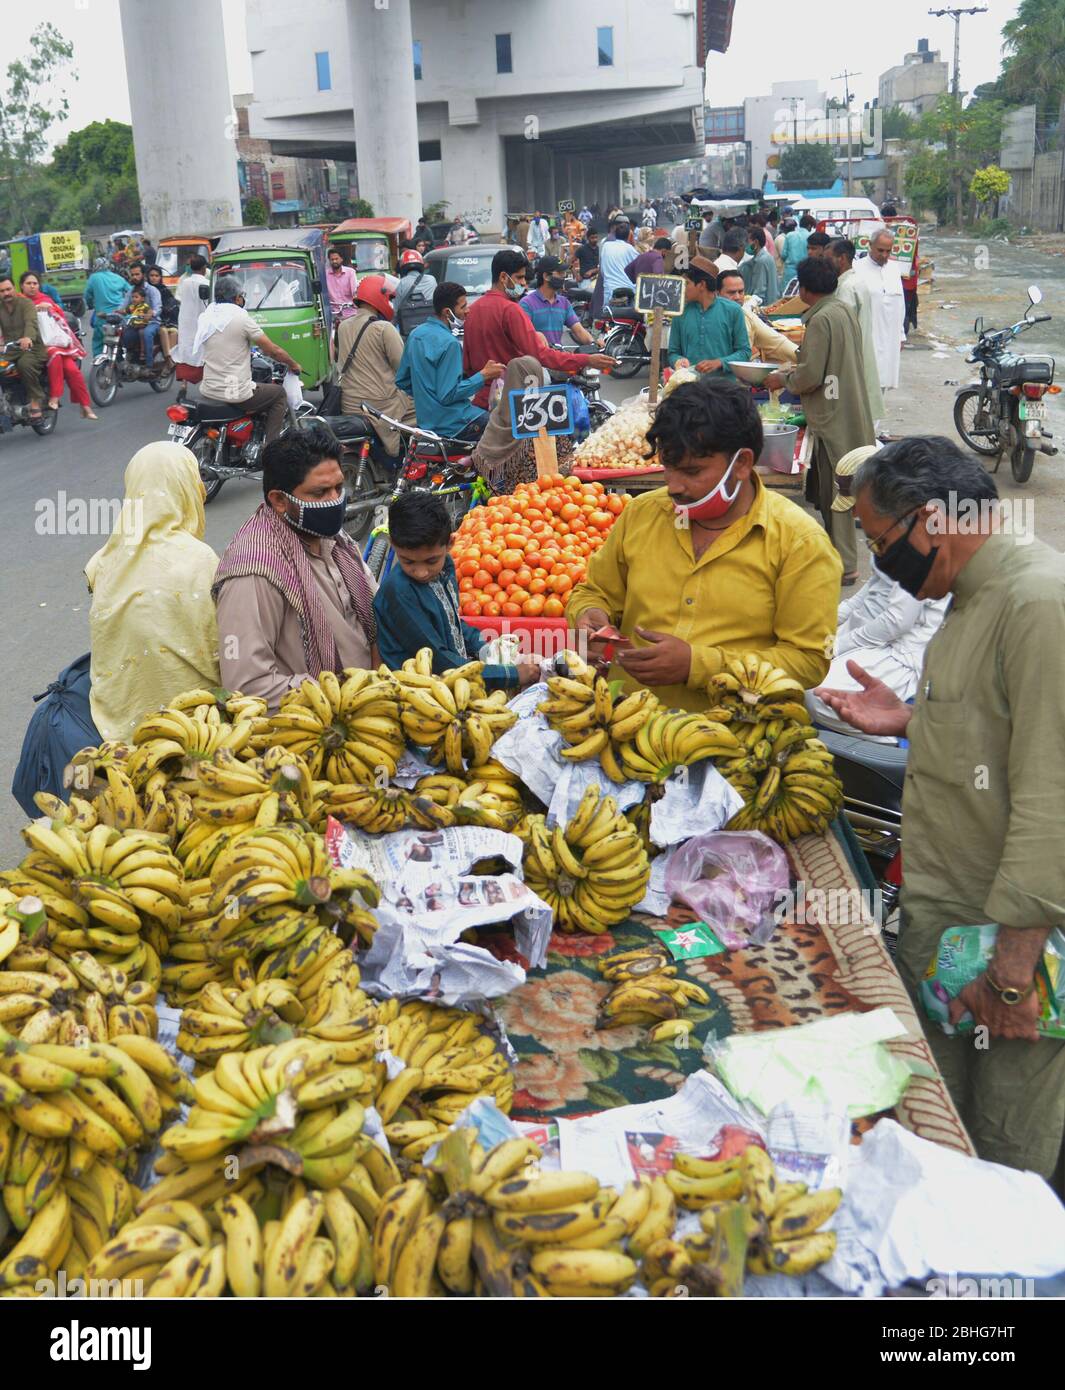 lahore-pakistan-25th-apr-2020-pakistani-large-number-of-faithful-muslims-buy-different-food-items-from-a-market-for-iftar-dinner-without-social-distancing-during-the-first-day-of-the-muslim-holy-month-of-ramadan-ul-mubarak-in-lahore-millions-of-muslims-have-started-ramadan-the-holiest-month-on-the-islamic-calendar-under-the-coronavirus-lockdown-or-strict-social-restrictions-from-government-of-pakistan-photo-by-rana-sajid-hussainpacific-press-credit-pacific-press-agencyalamy-live-news-2BHG7HT.jpg